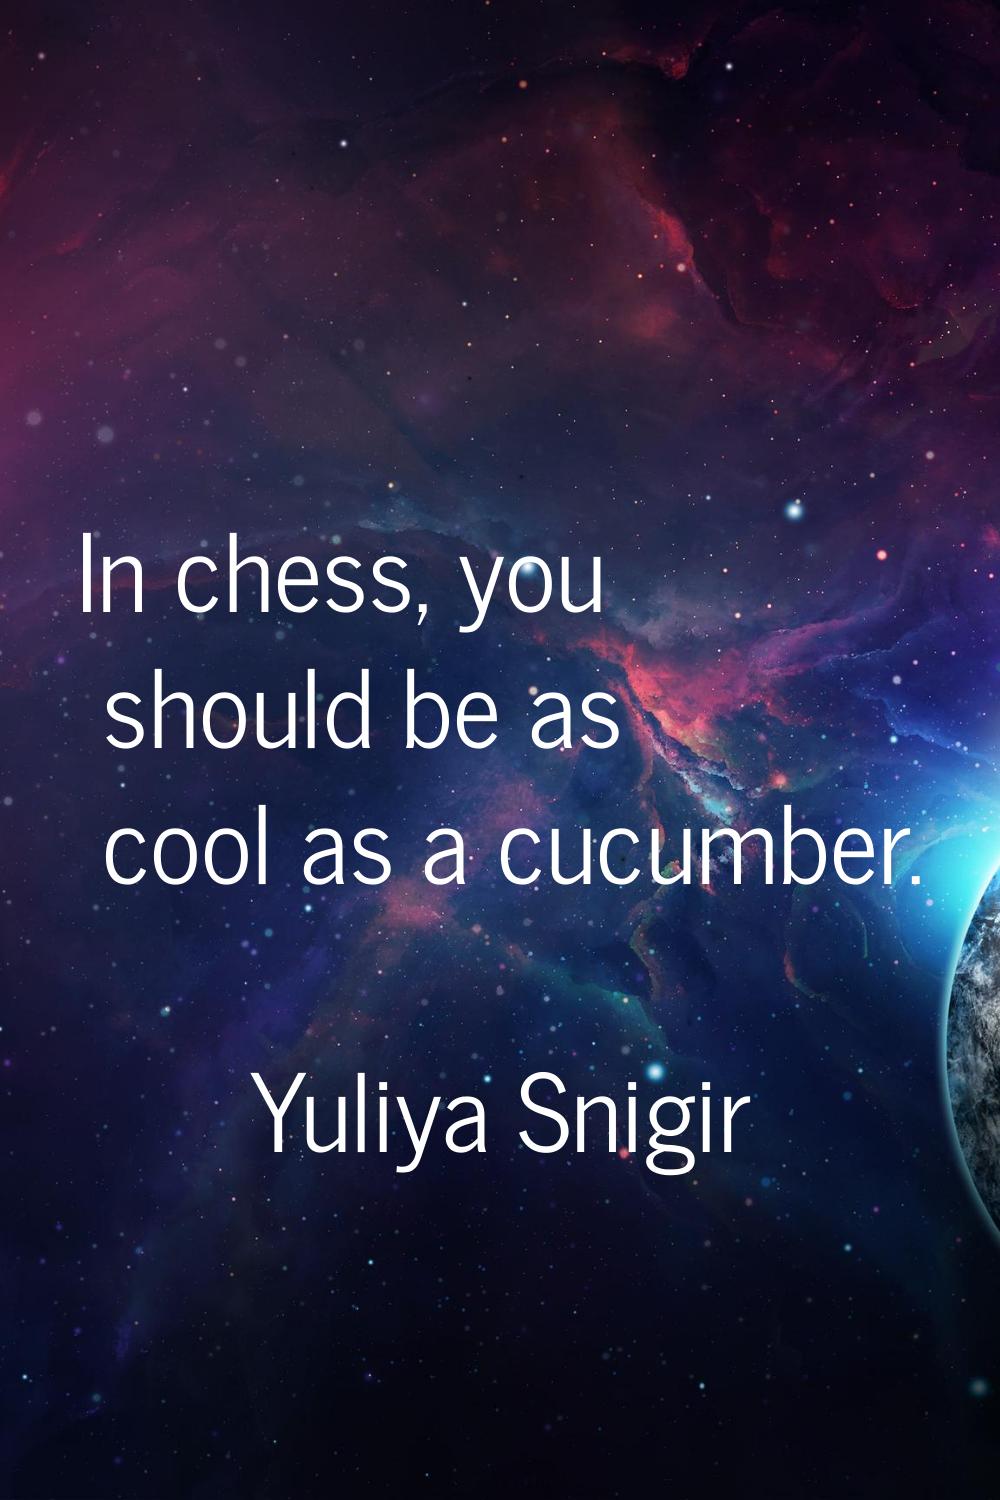 In chess, you should be as cool as a cucumber.